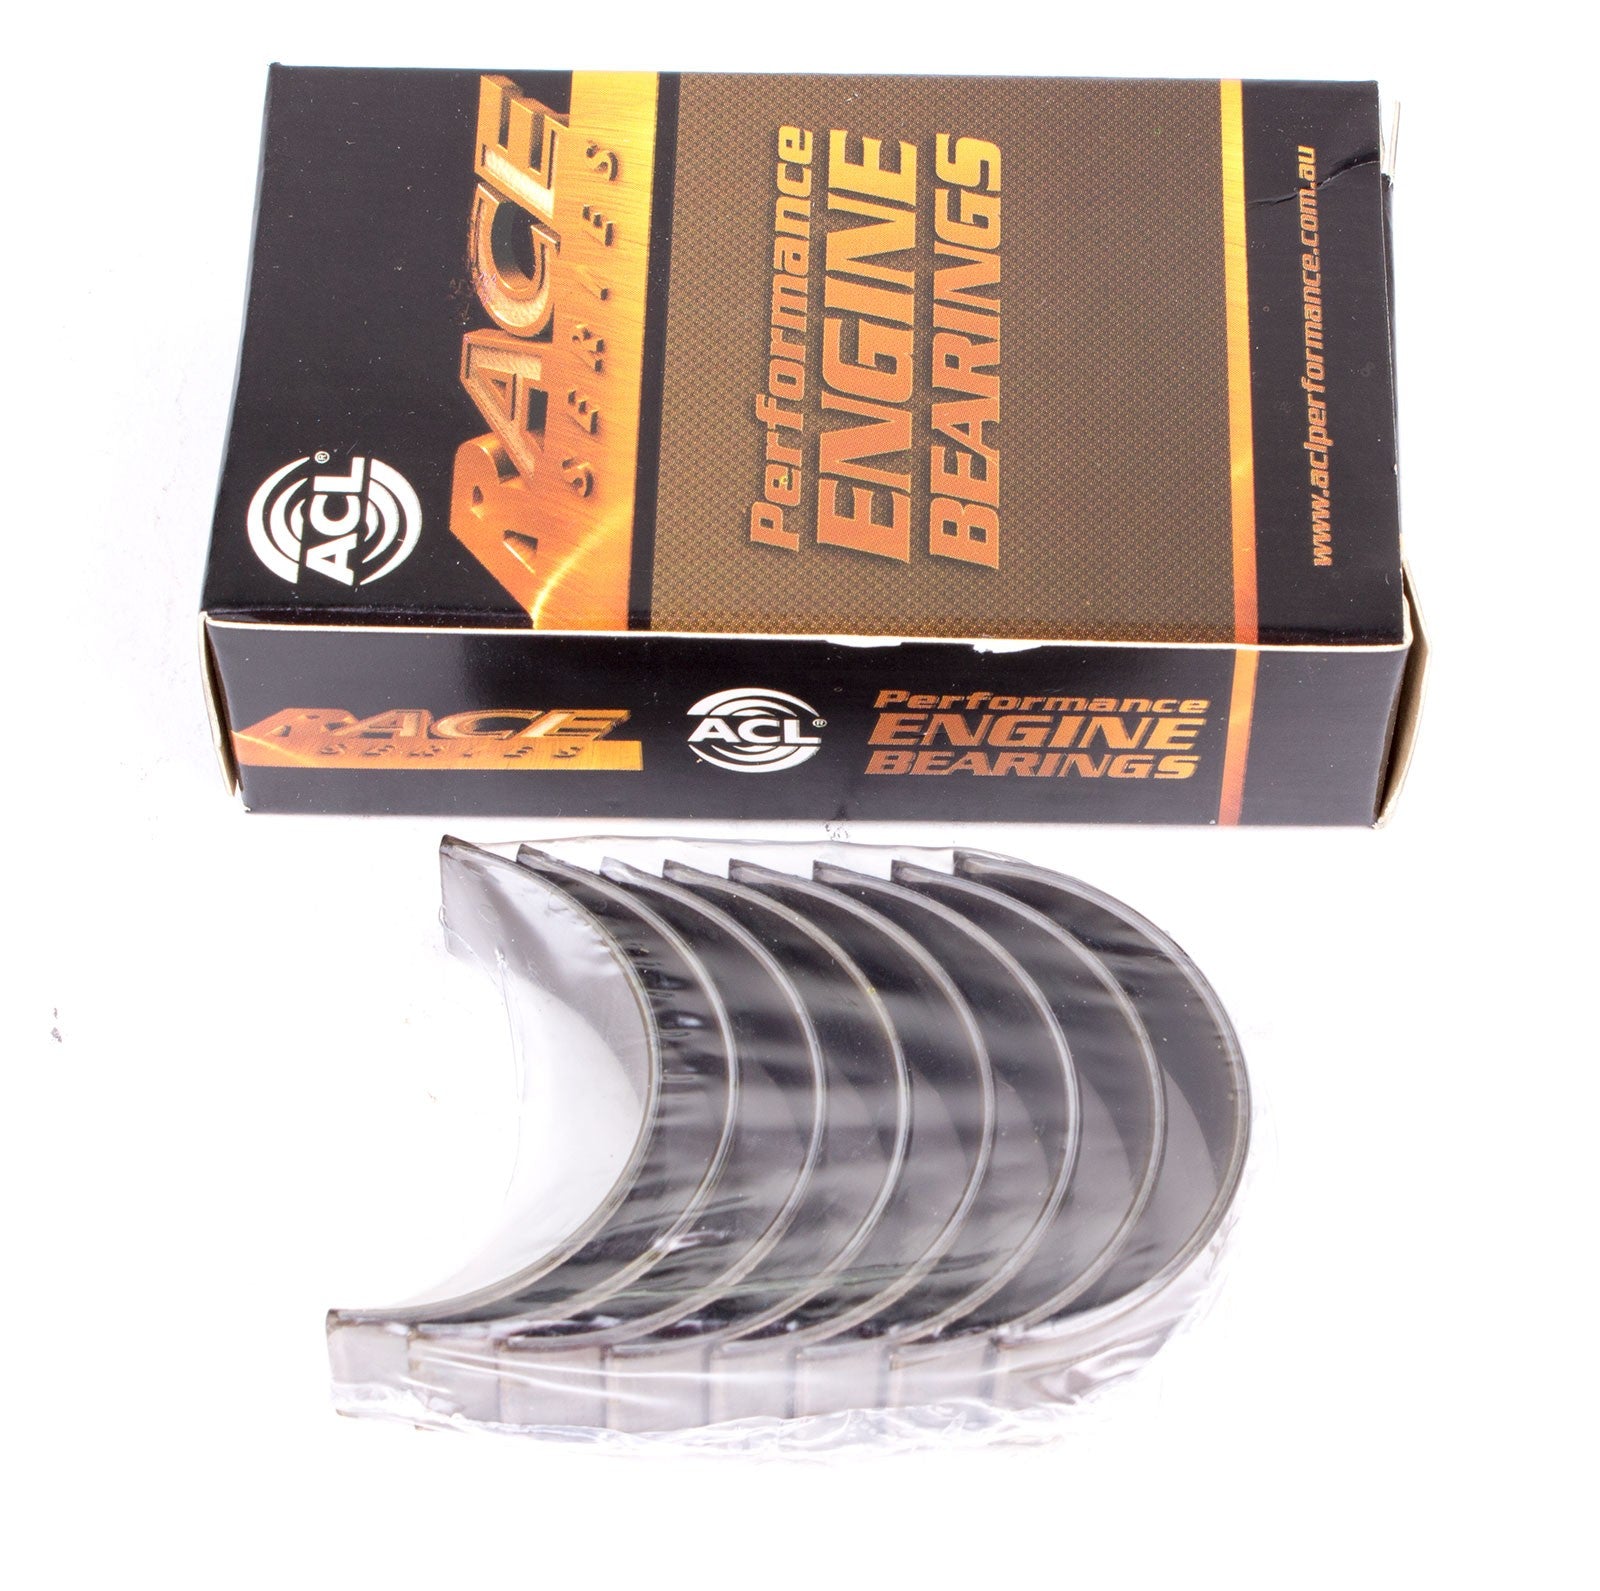 ACL 5M1432H-01 Main bearing set (ACL Race Series) Photo-0 